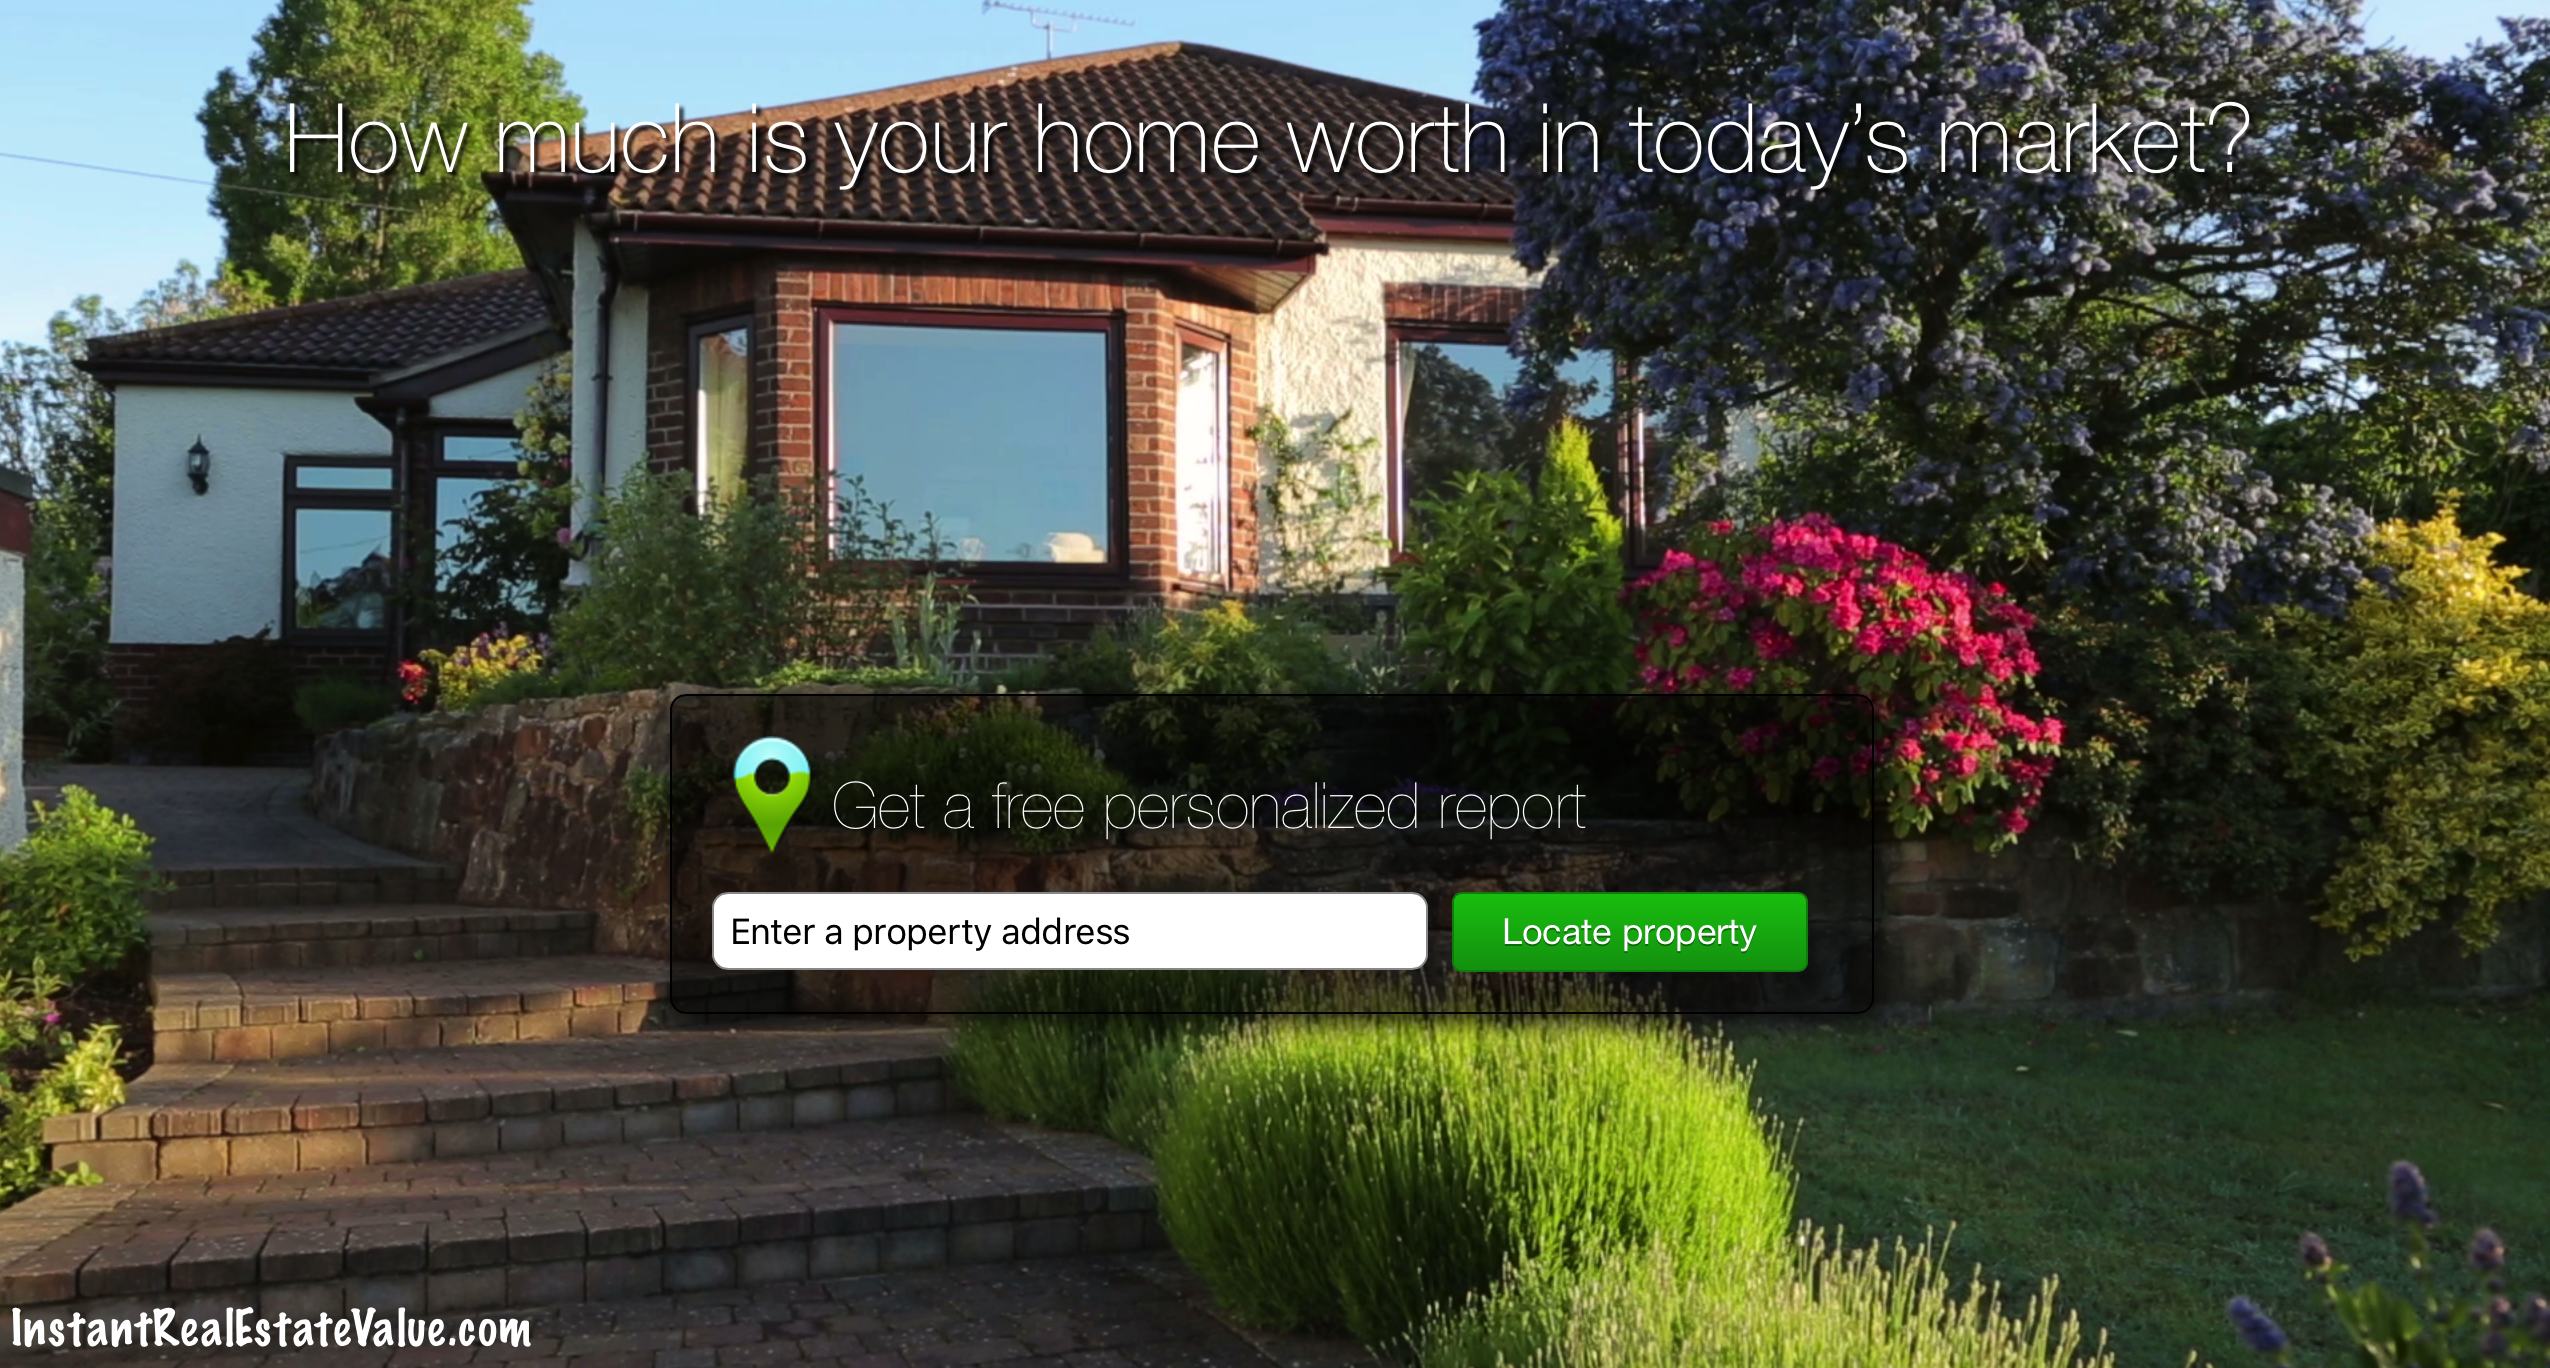 How can you find out your home's market value for free?